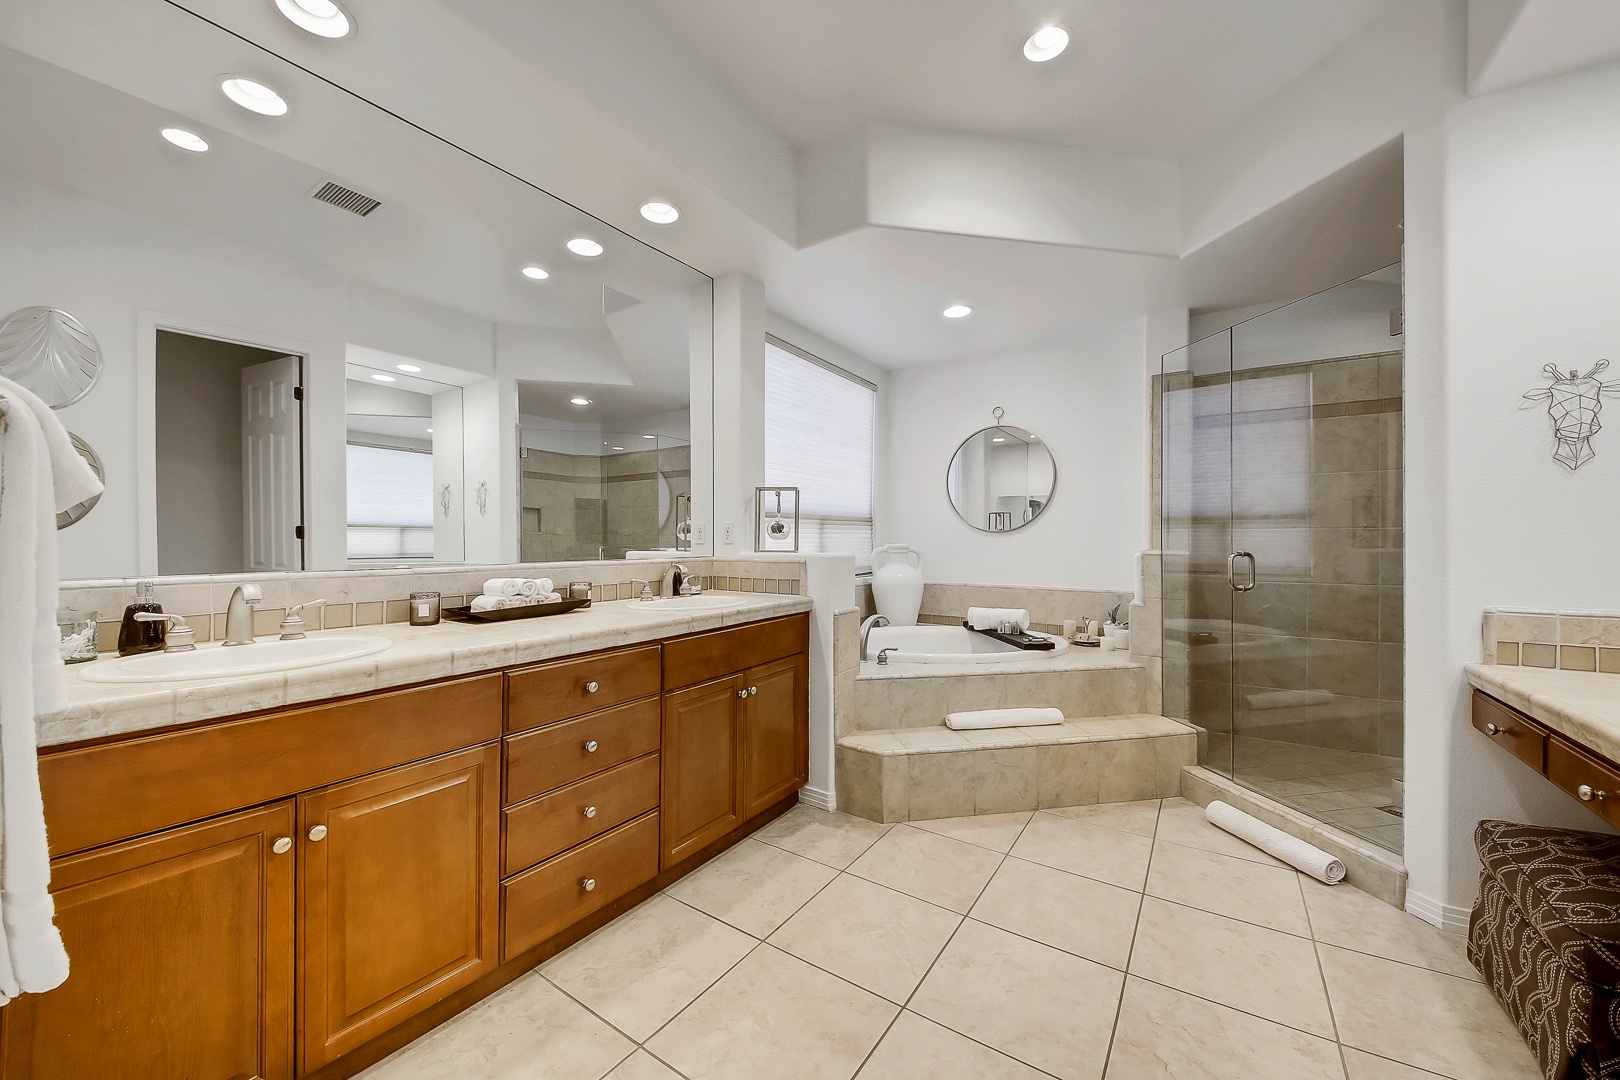 The private, en suite bathroom features a soaking tub, tile shower and double vanity sinks with a makeup counter.